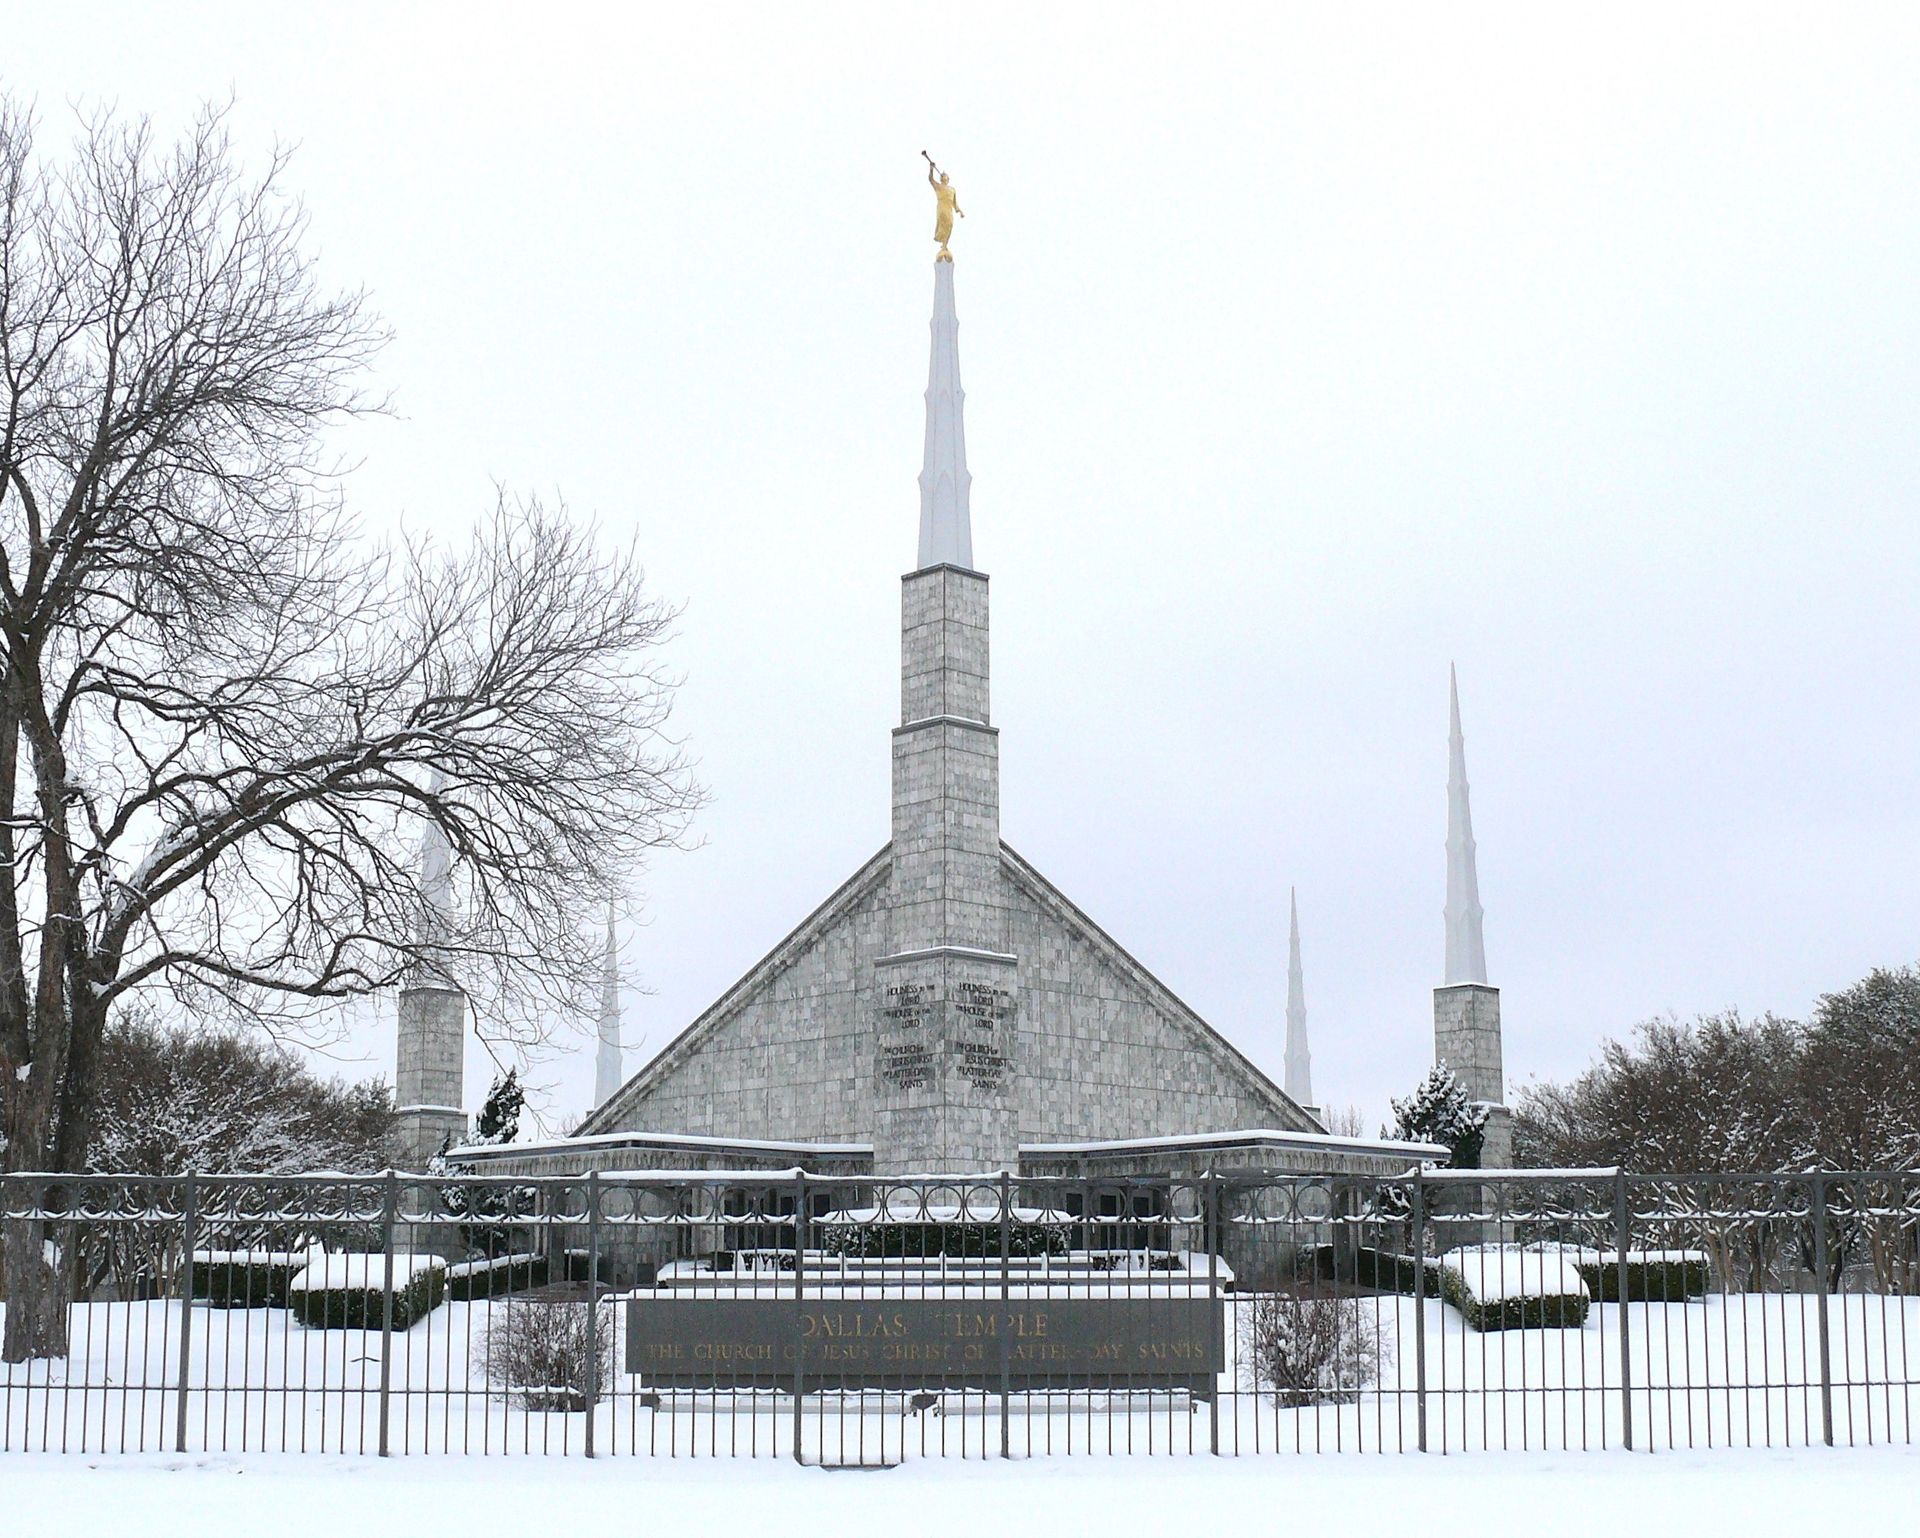 A view of the Dallas Texas Temple and grounds in the winter.